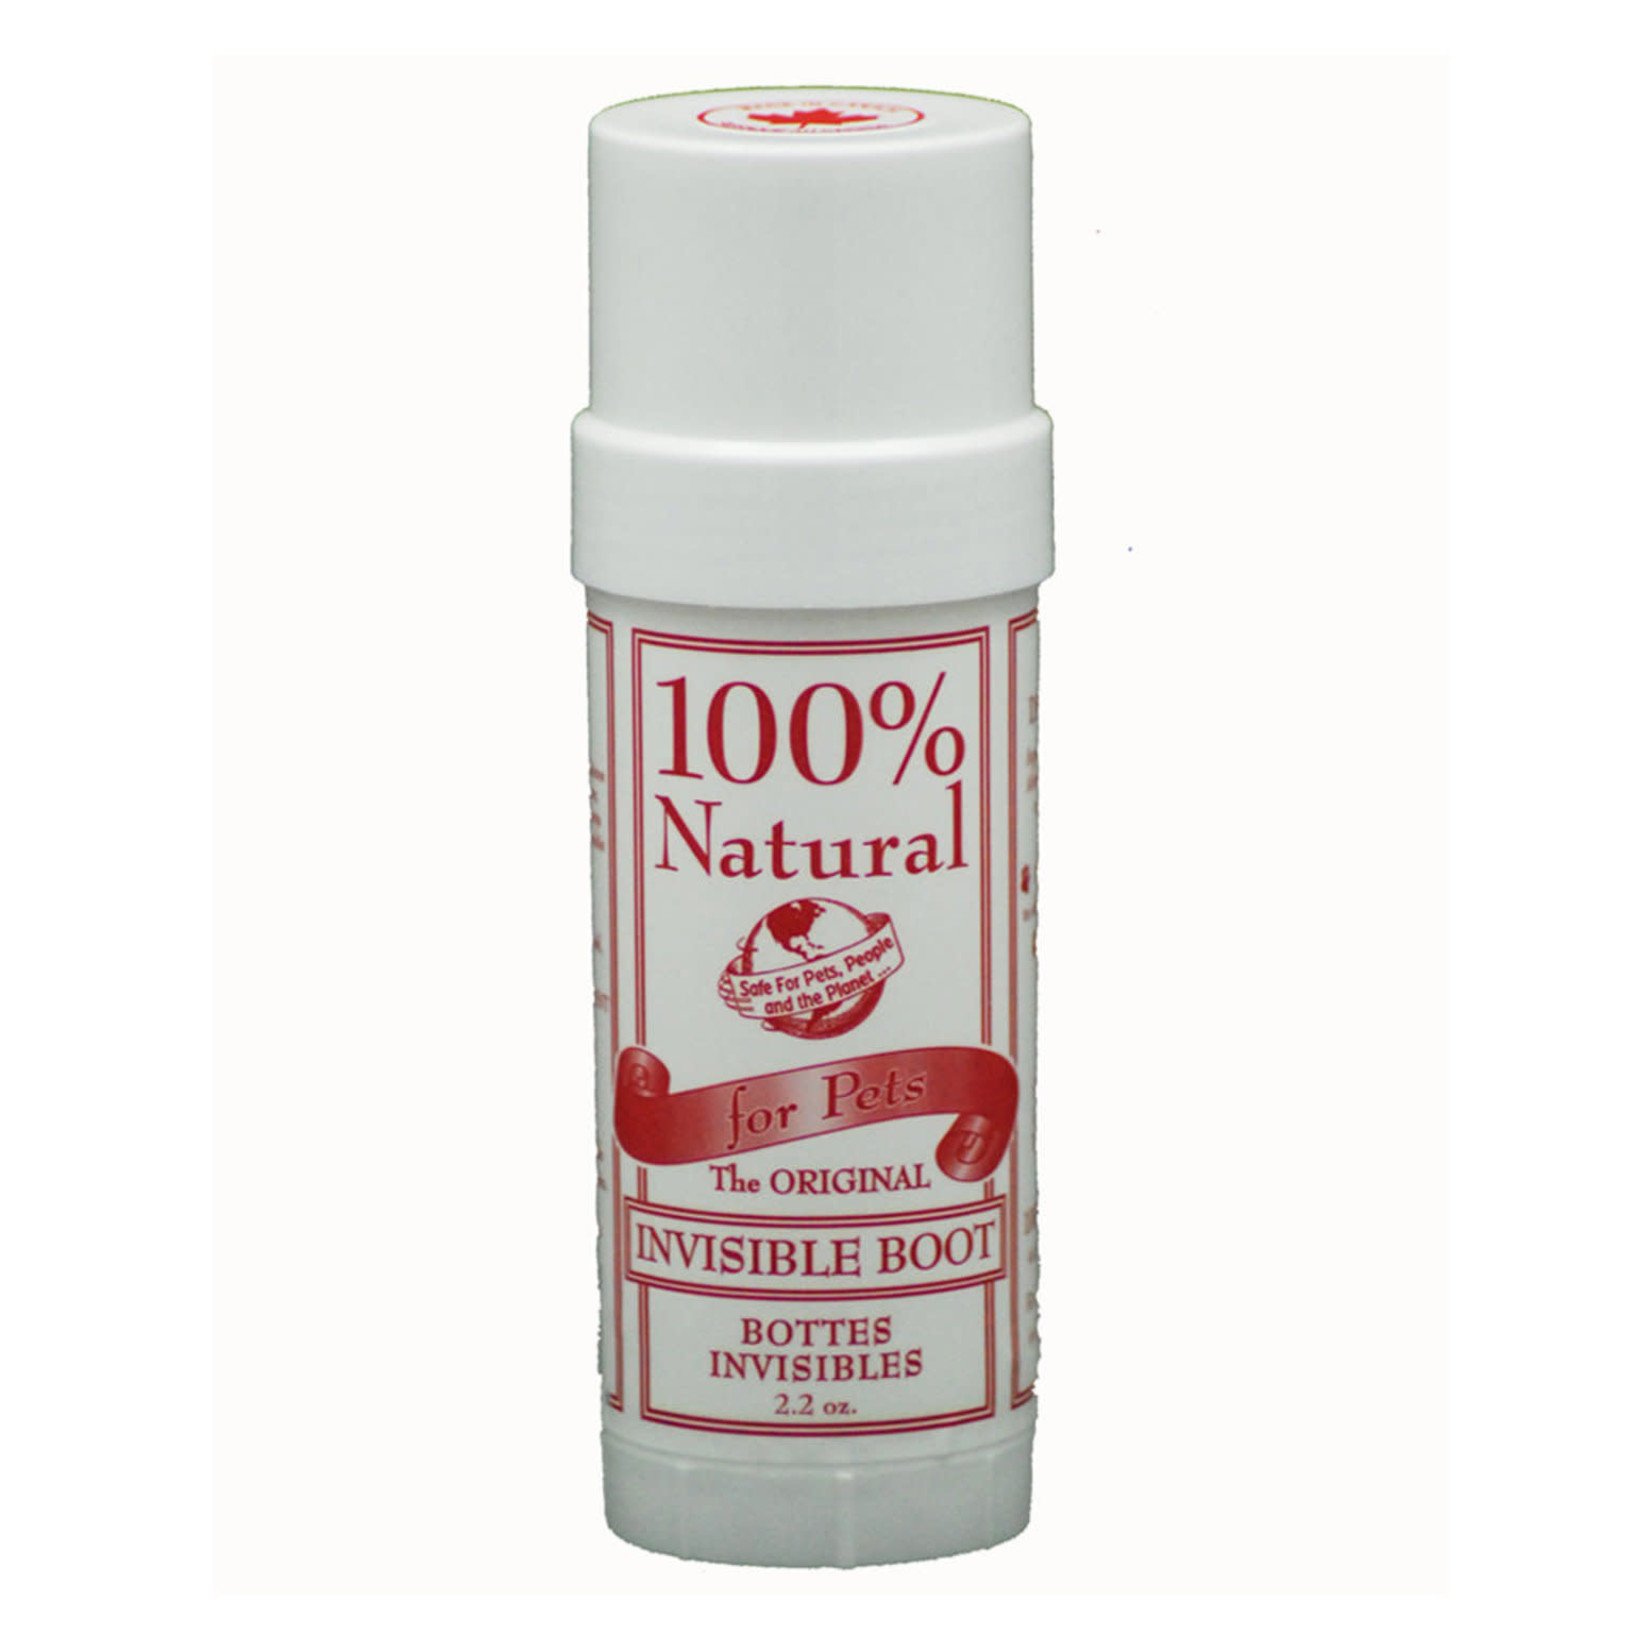 Natural For Pets Natural For Pets Invisible Boot Cream Roll On 2.2 OZ